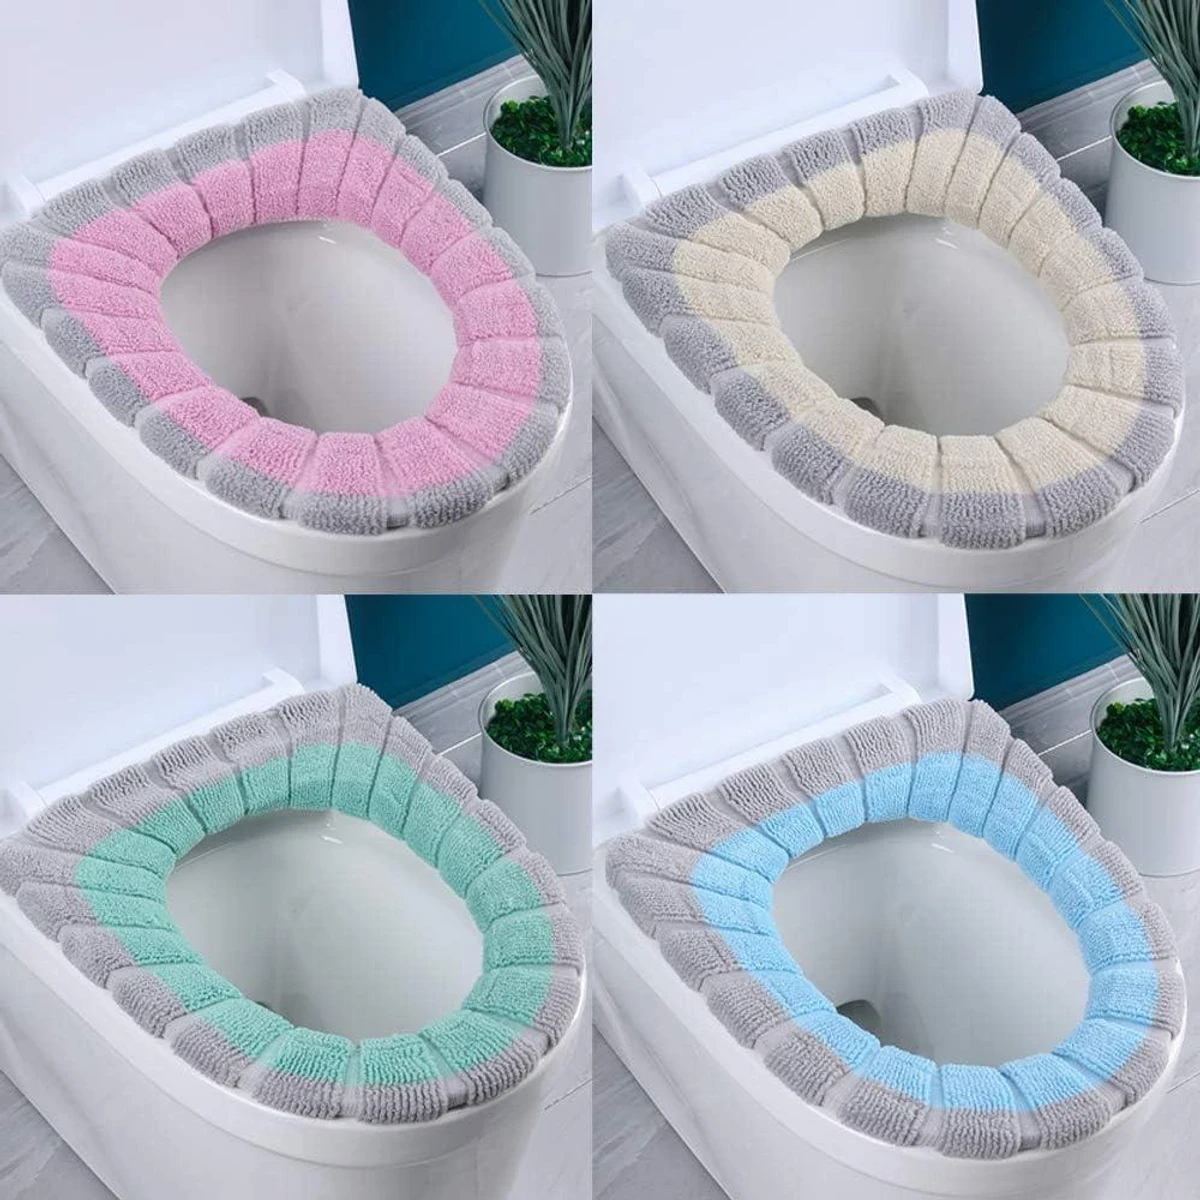 Washable Soft Toilet Seat Cover